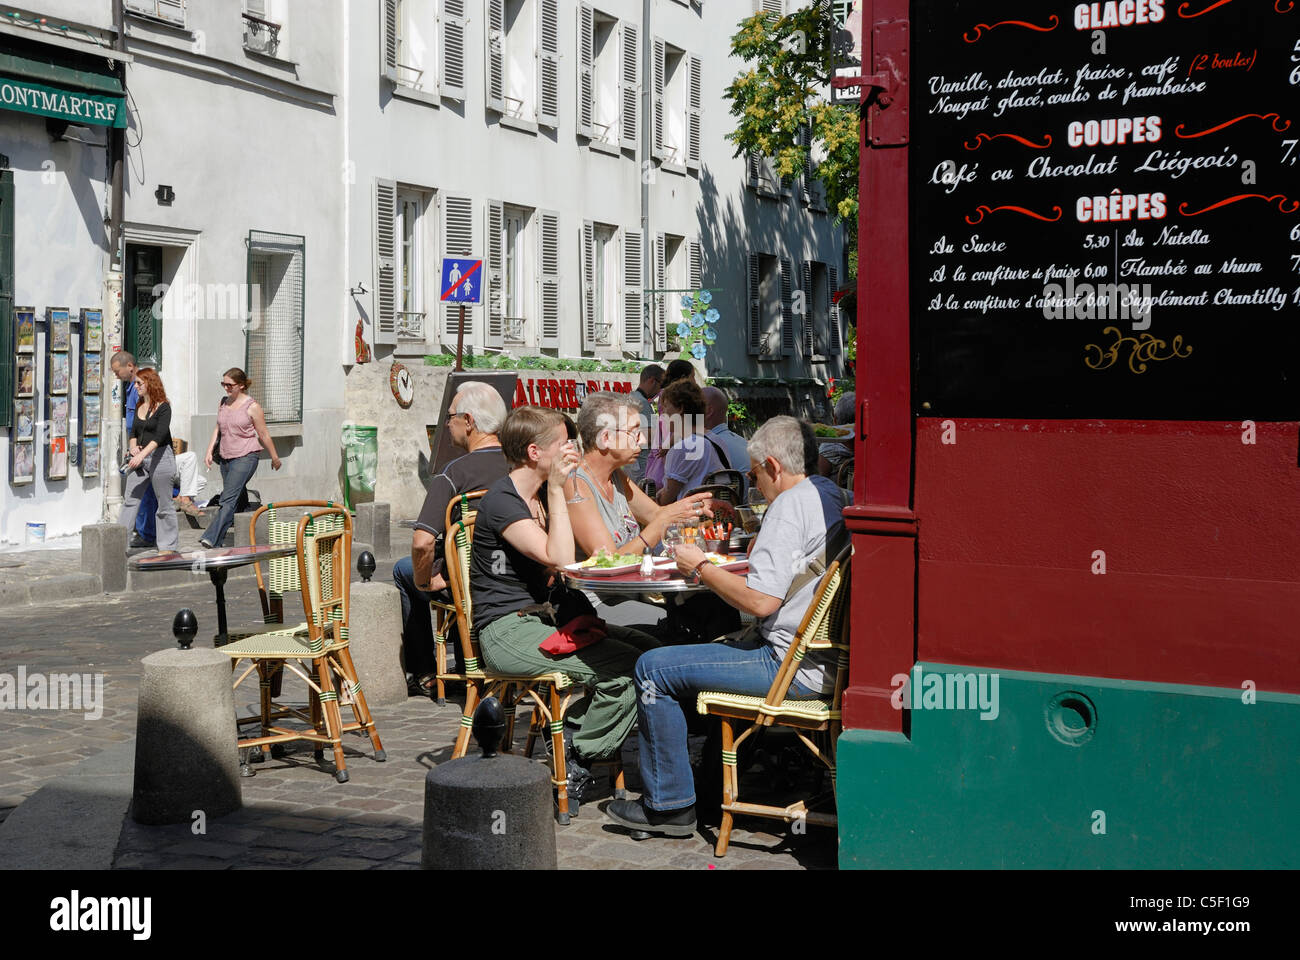 People sitting outdoors at Cafe Le Consulat Rue Norvins in the popular district of Montmartre, Paris France Stock Photo